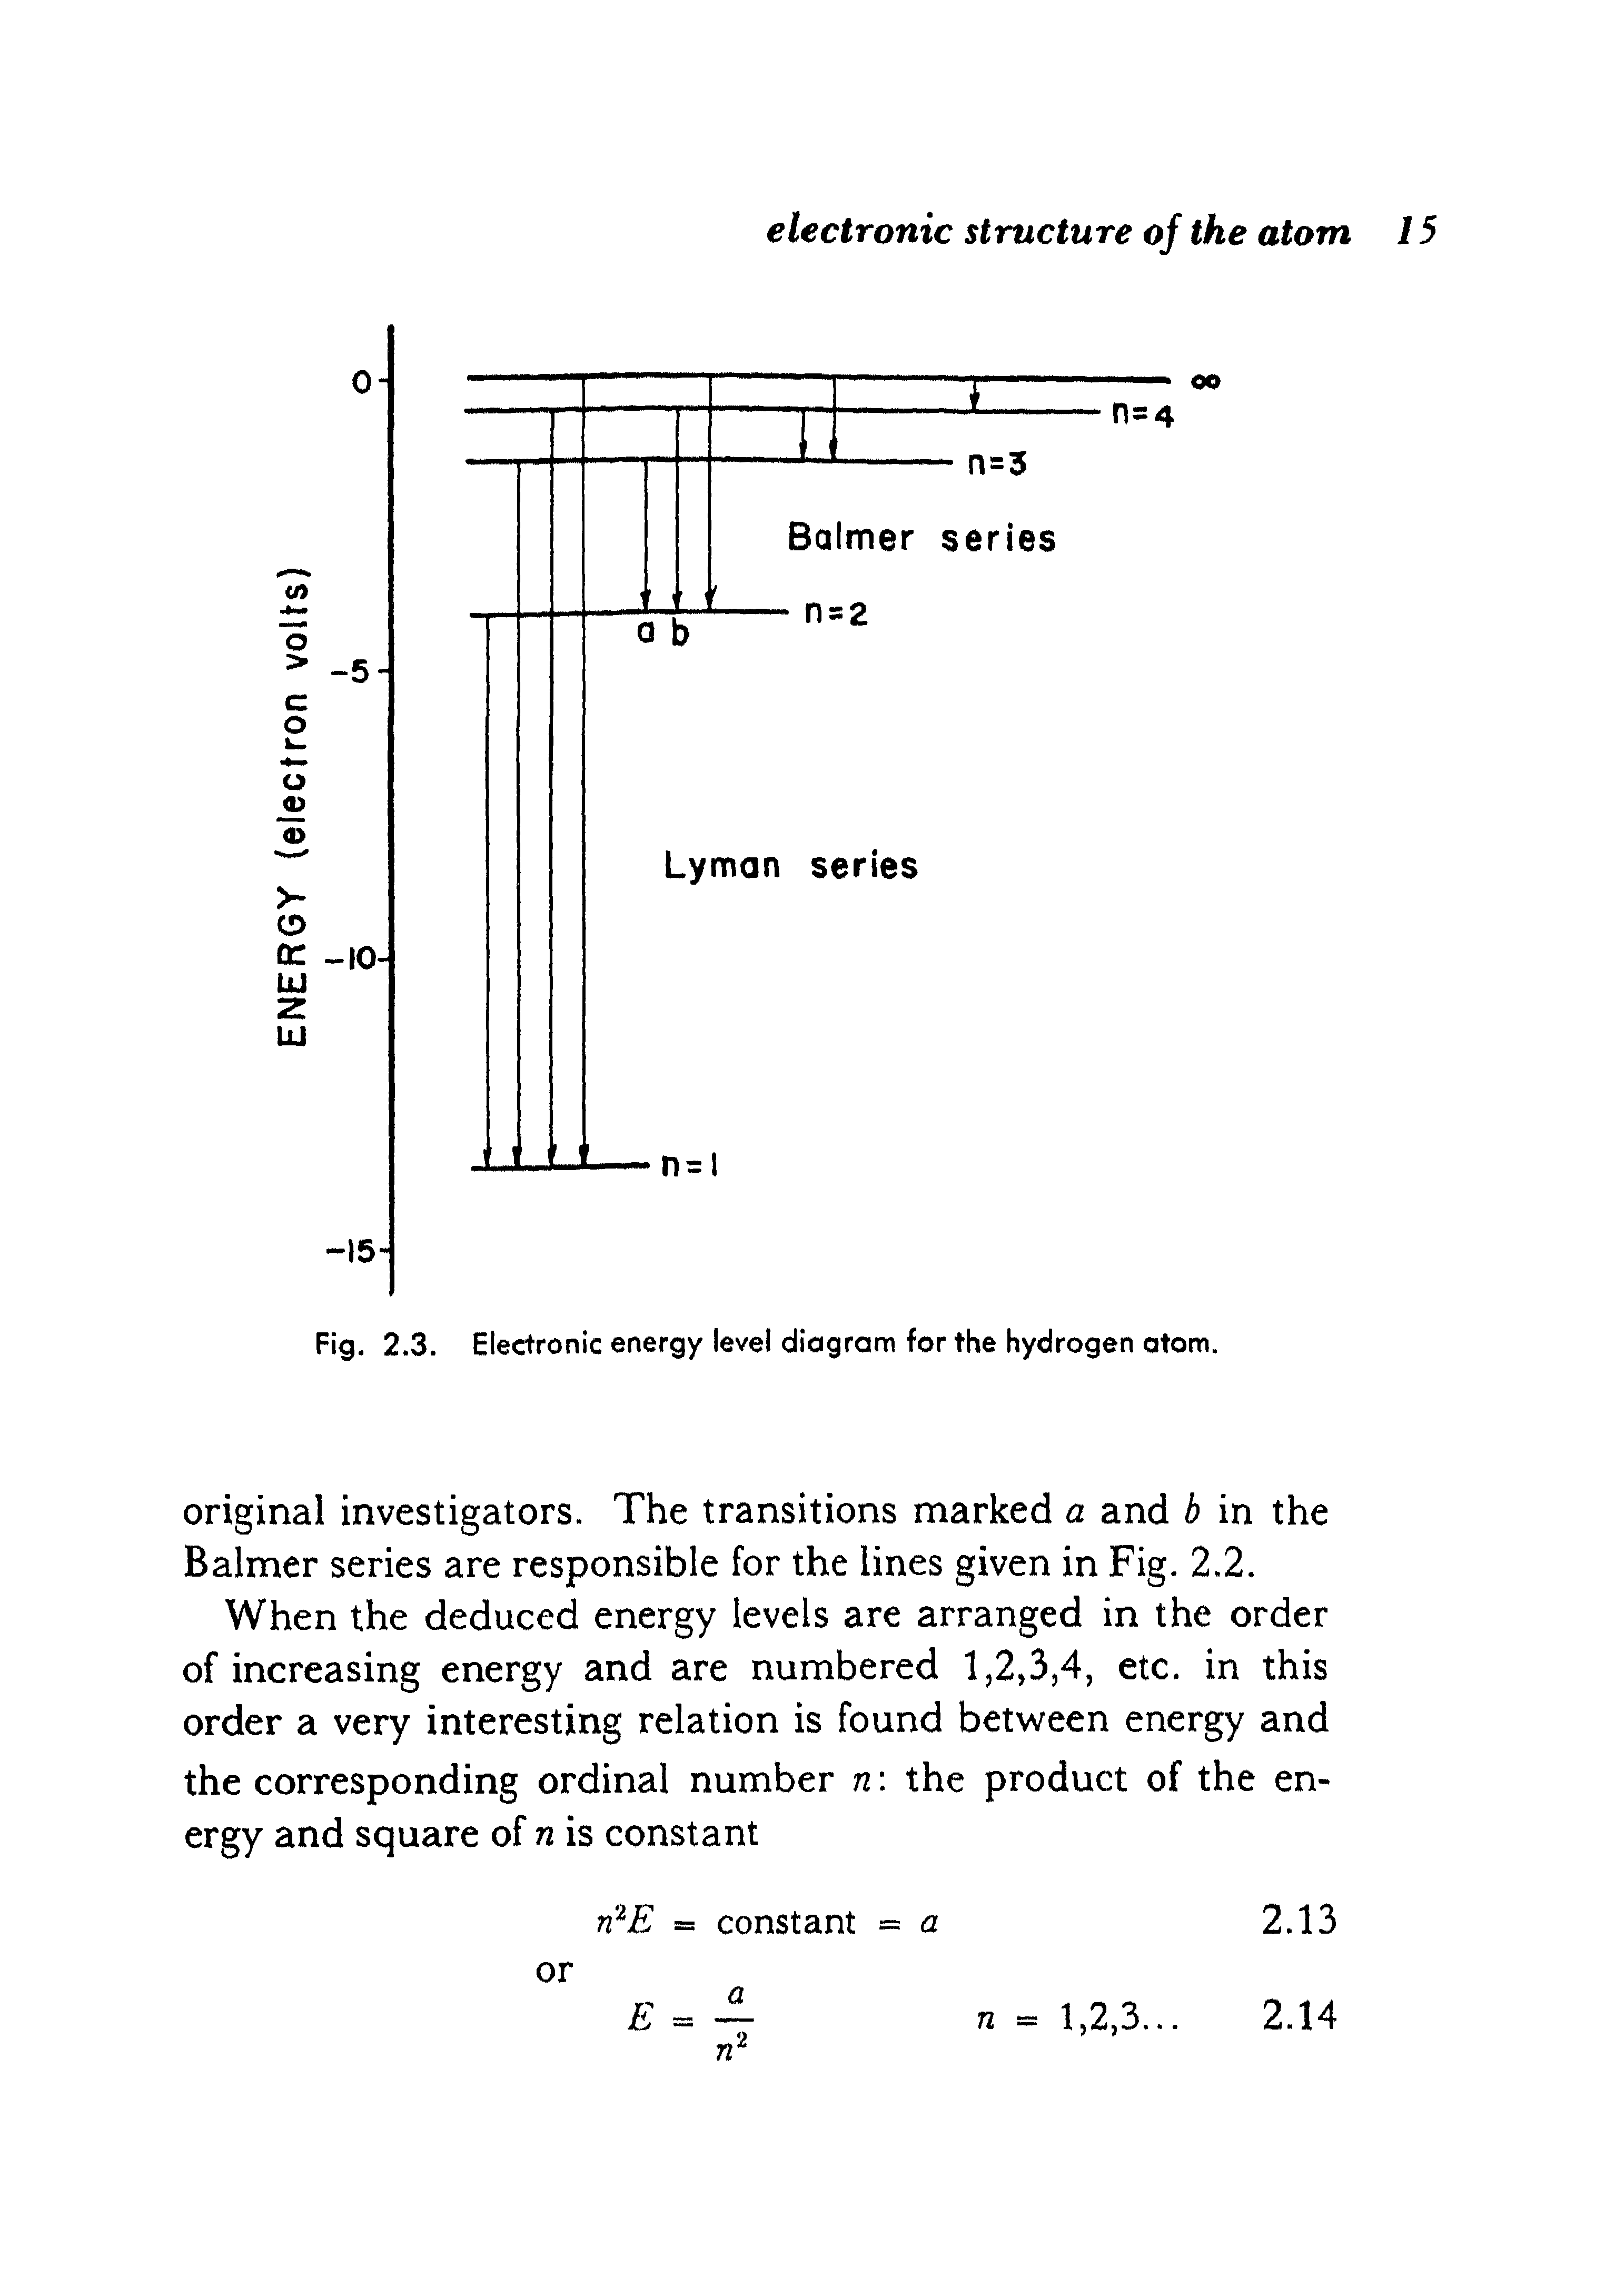 Fig. 2.3. Electronic energy level diagram for the hydrogen atom.